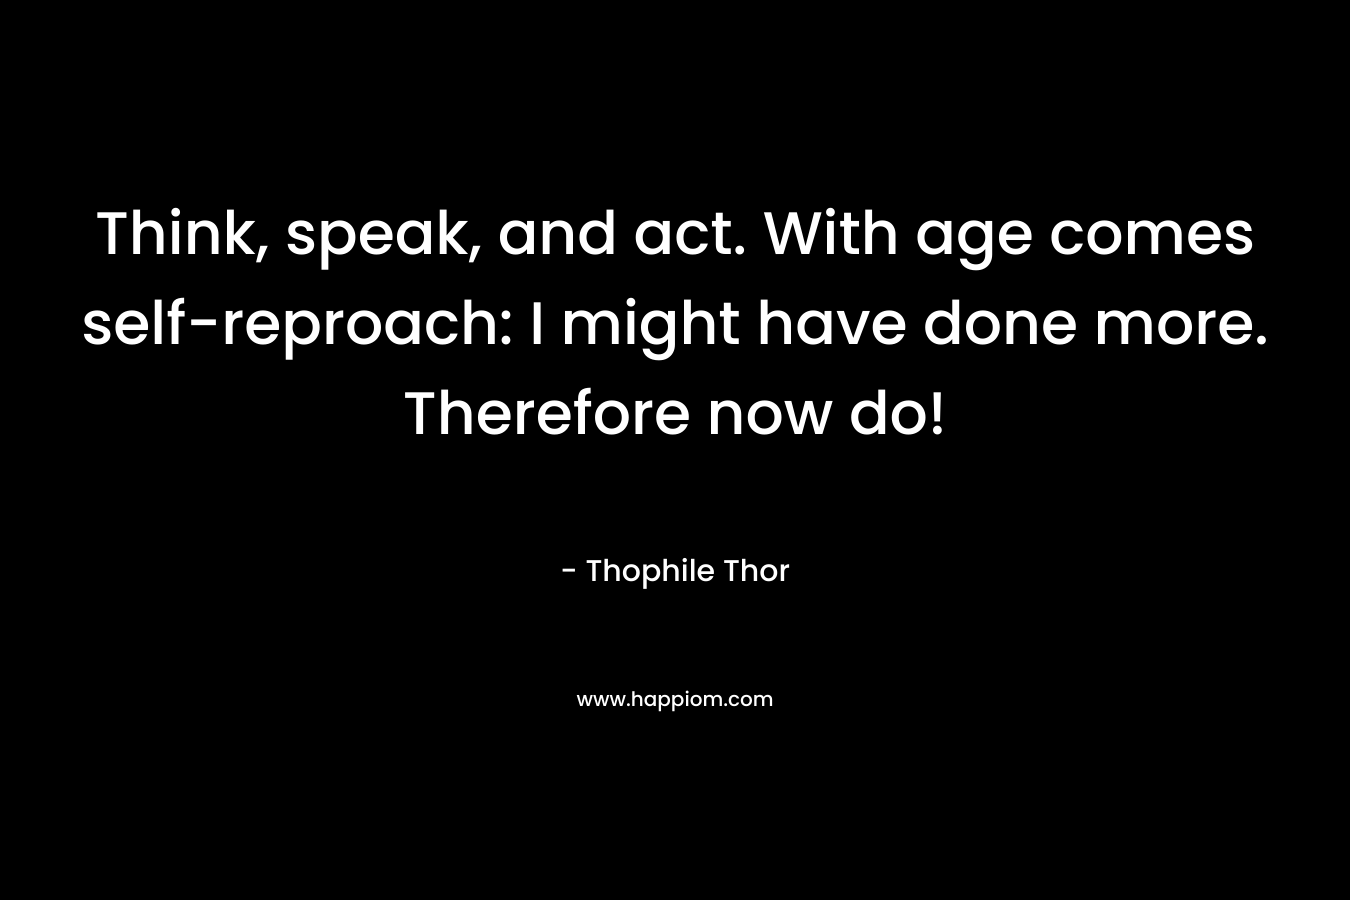 Think, speak, and act. With age comes self-reproach: I might have done more. Therefore now do! – Thophile Thor